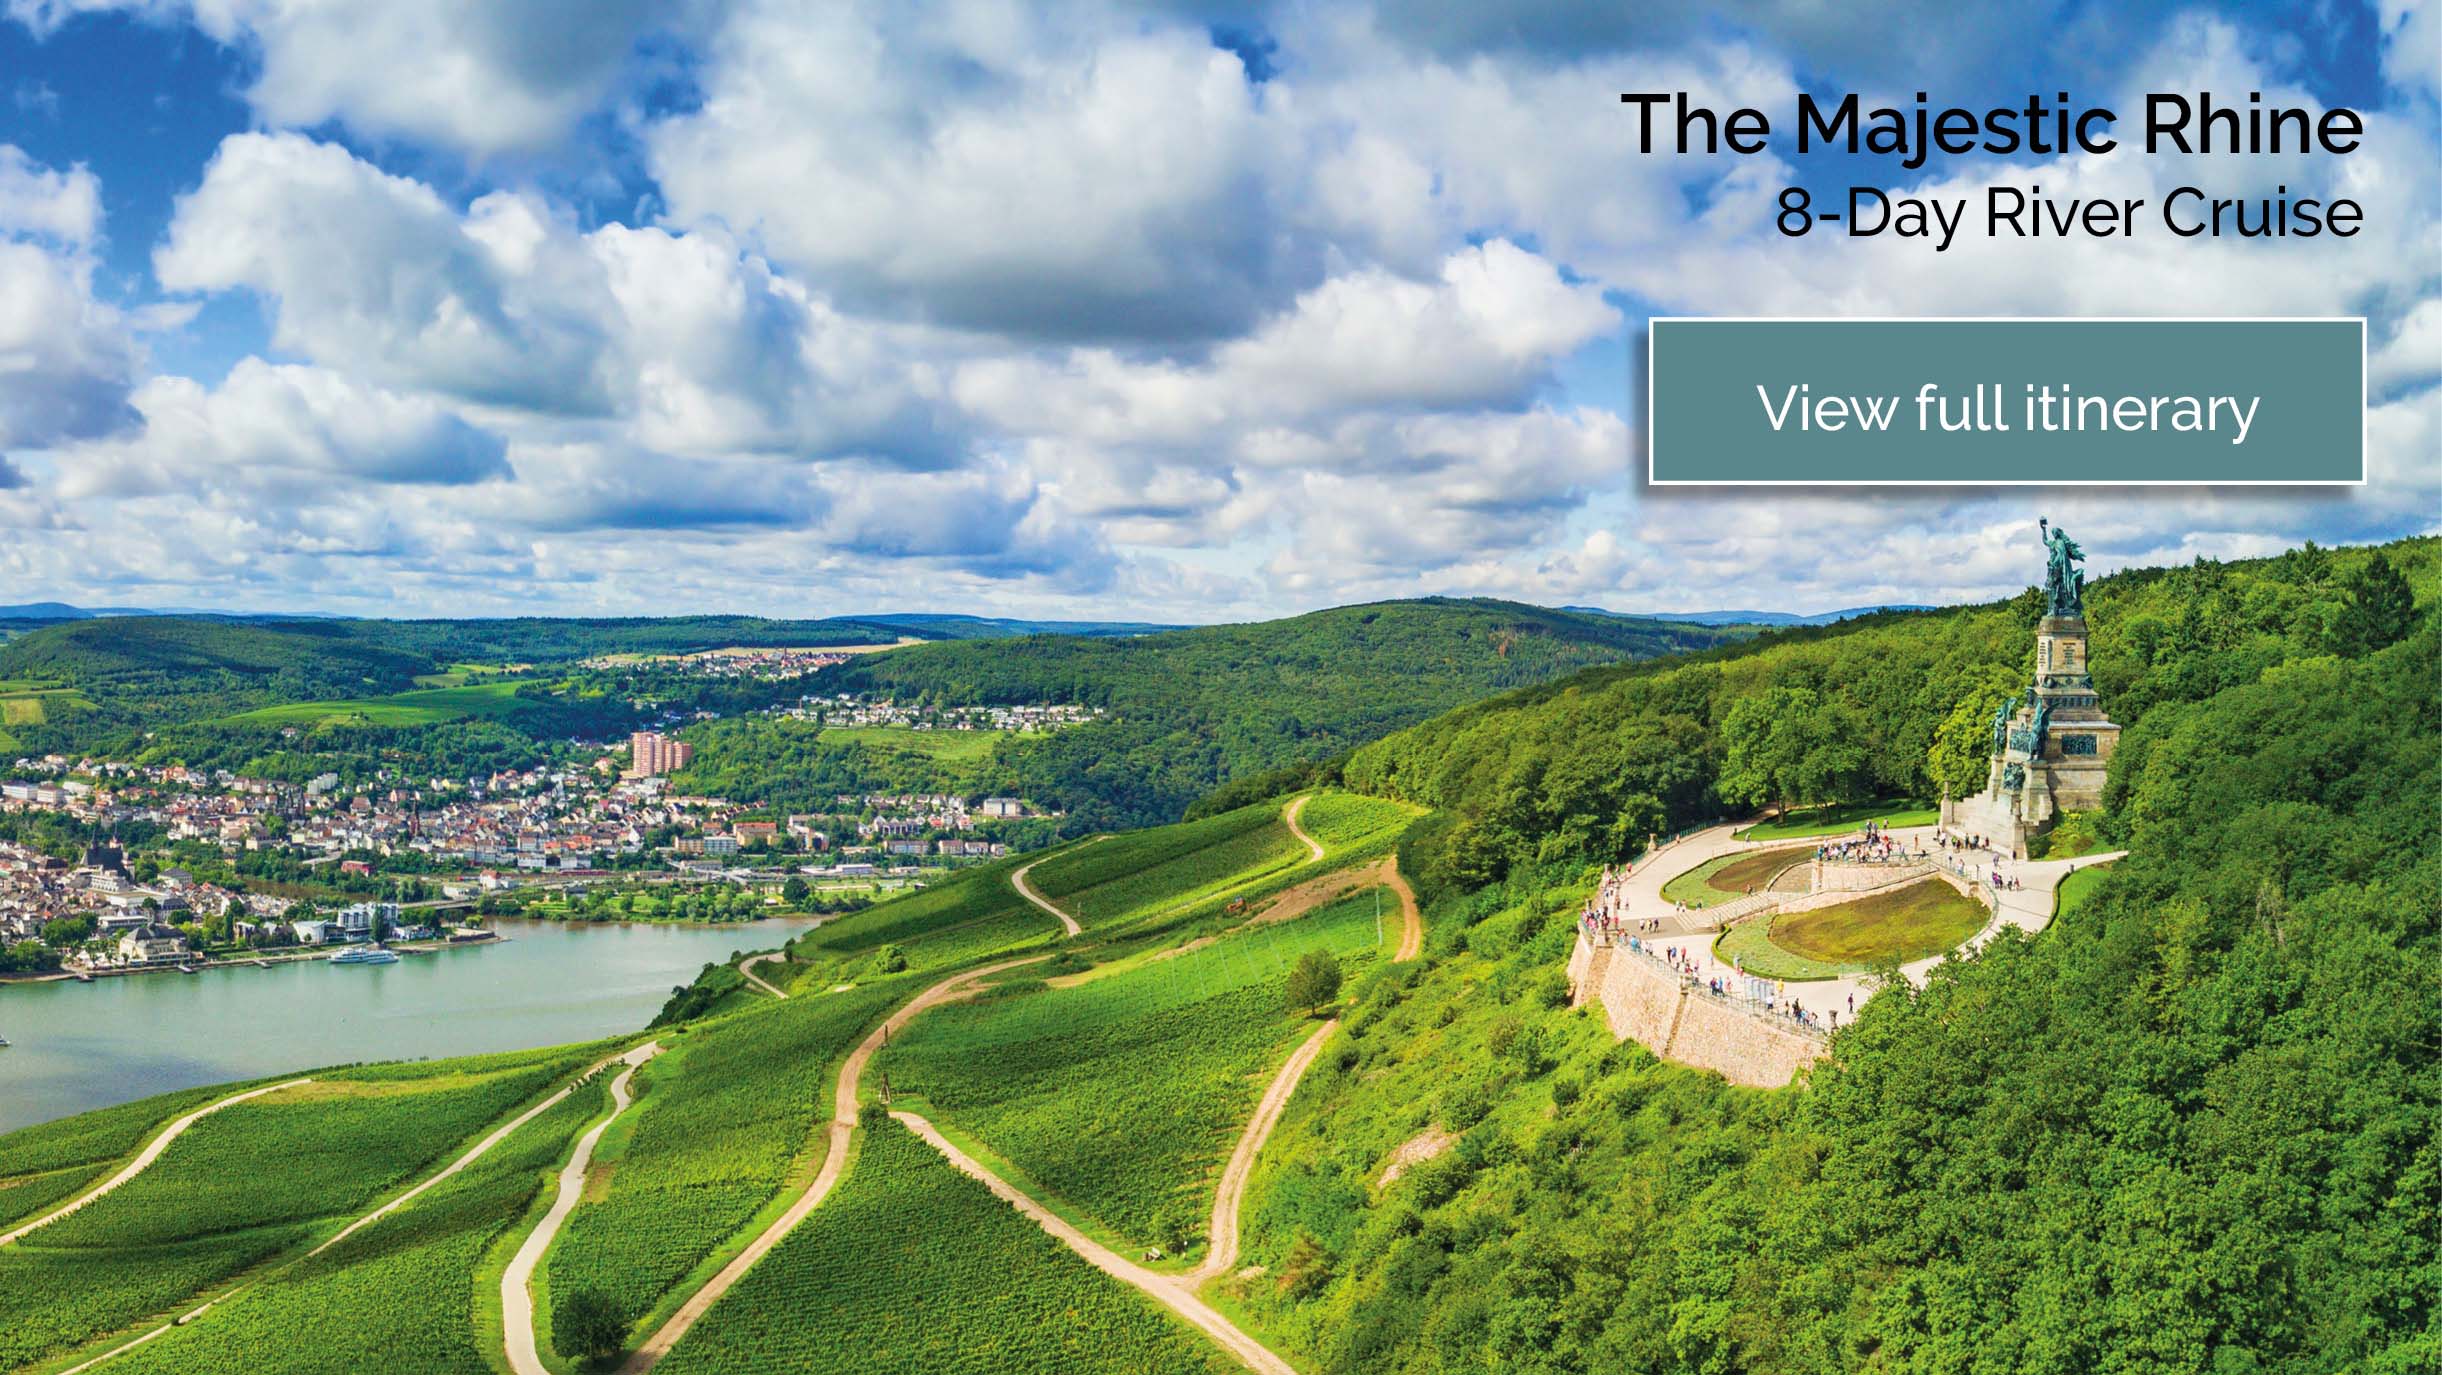 View The Majestic Rhine 8-Day River Cruise itinerary here